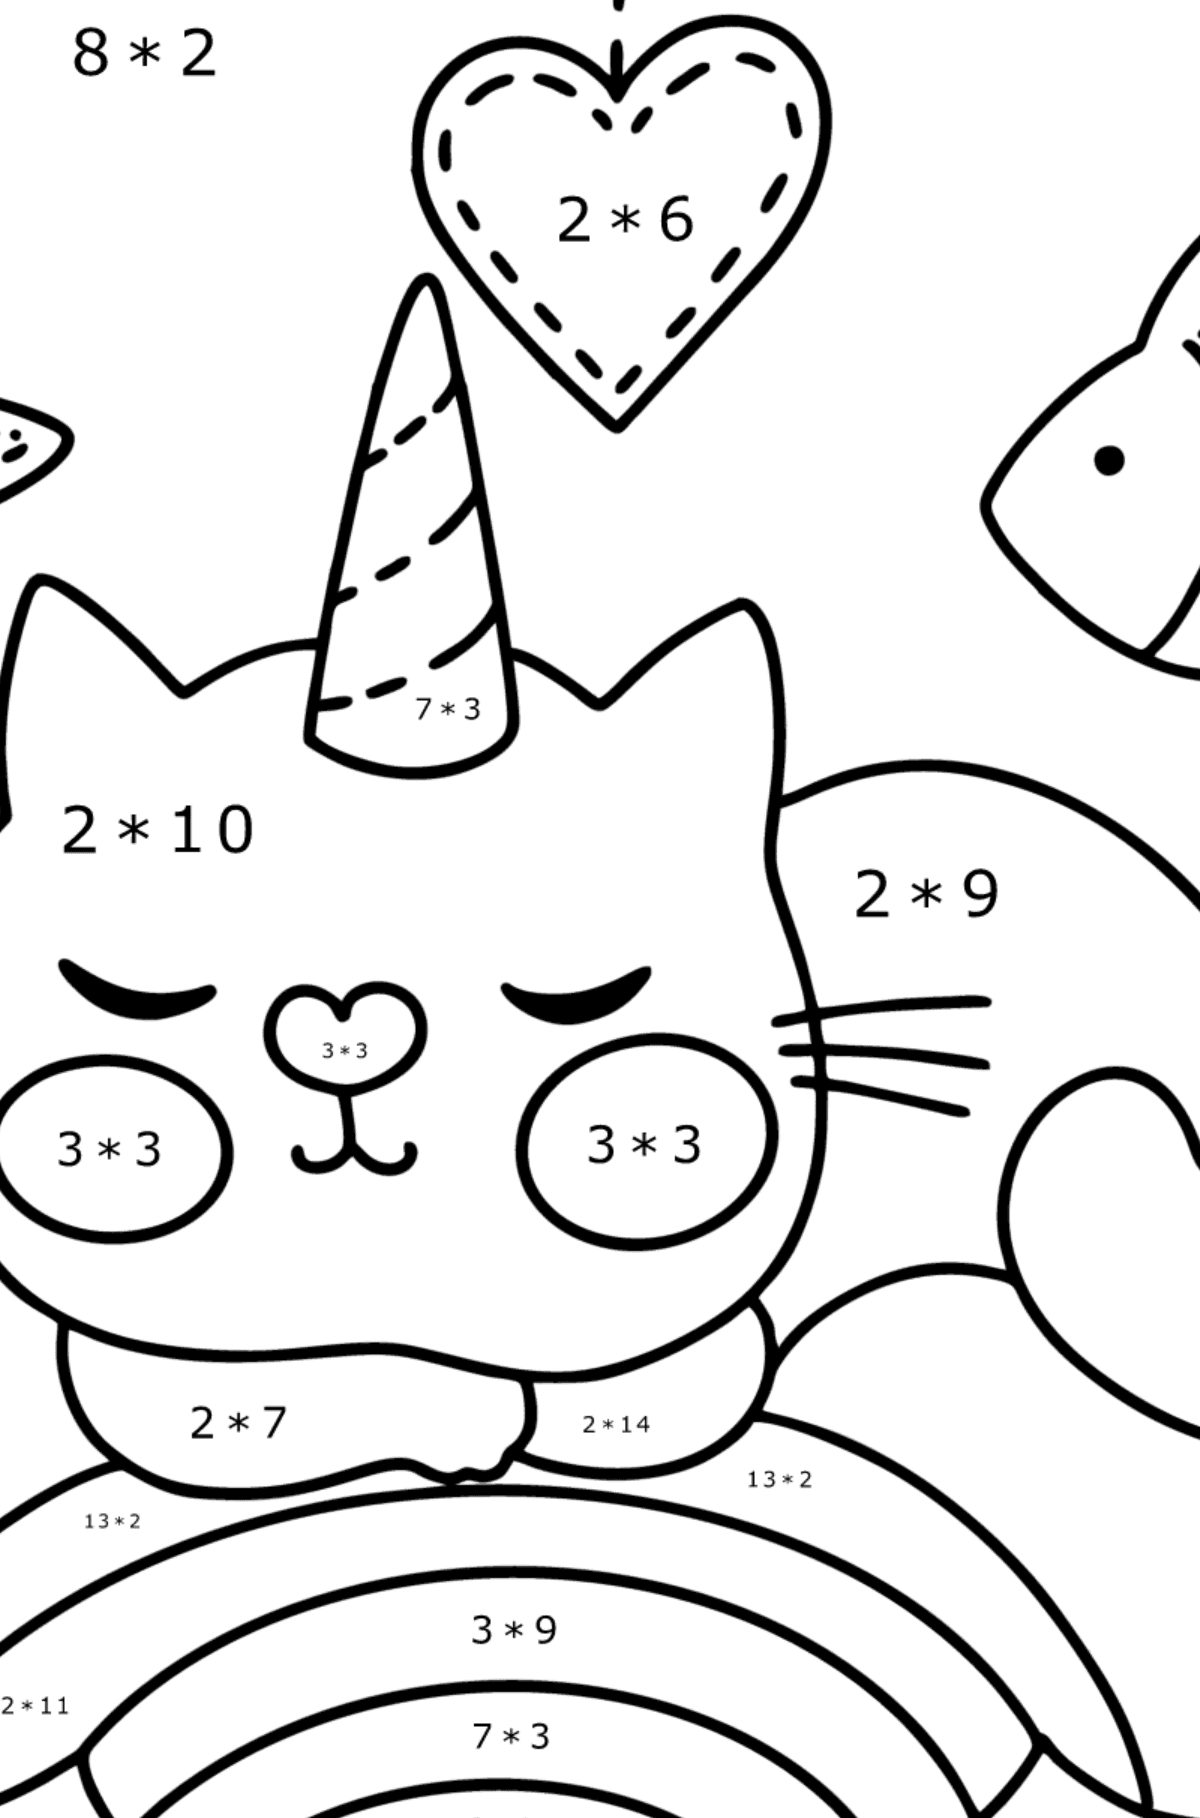 Cute cat unicorn coloring page - Math Coloring - Multiplication for Kids